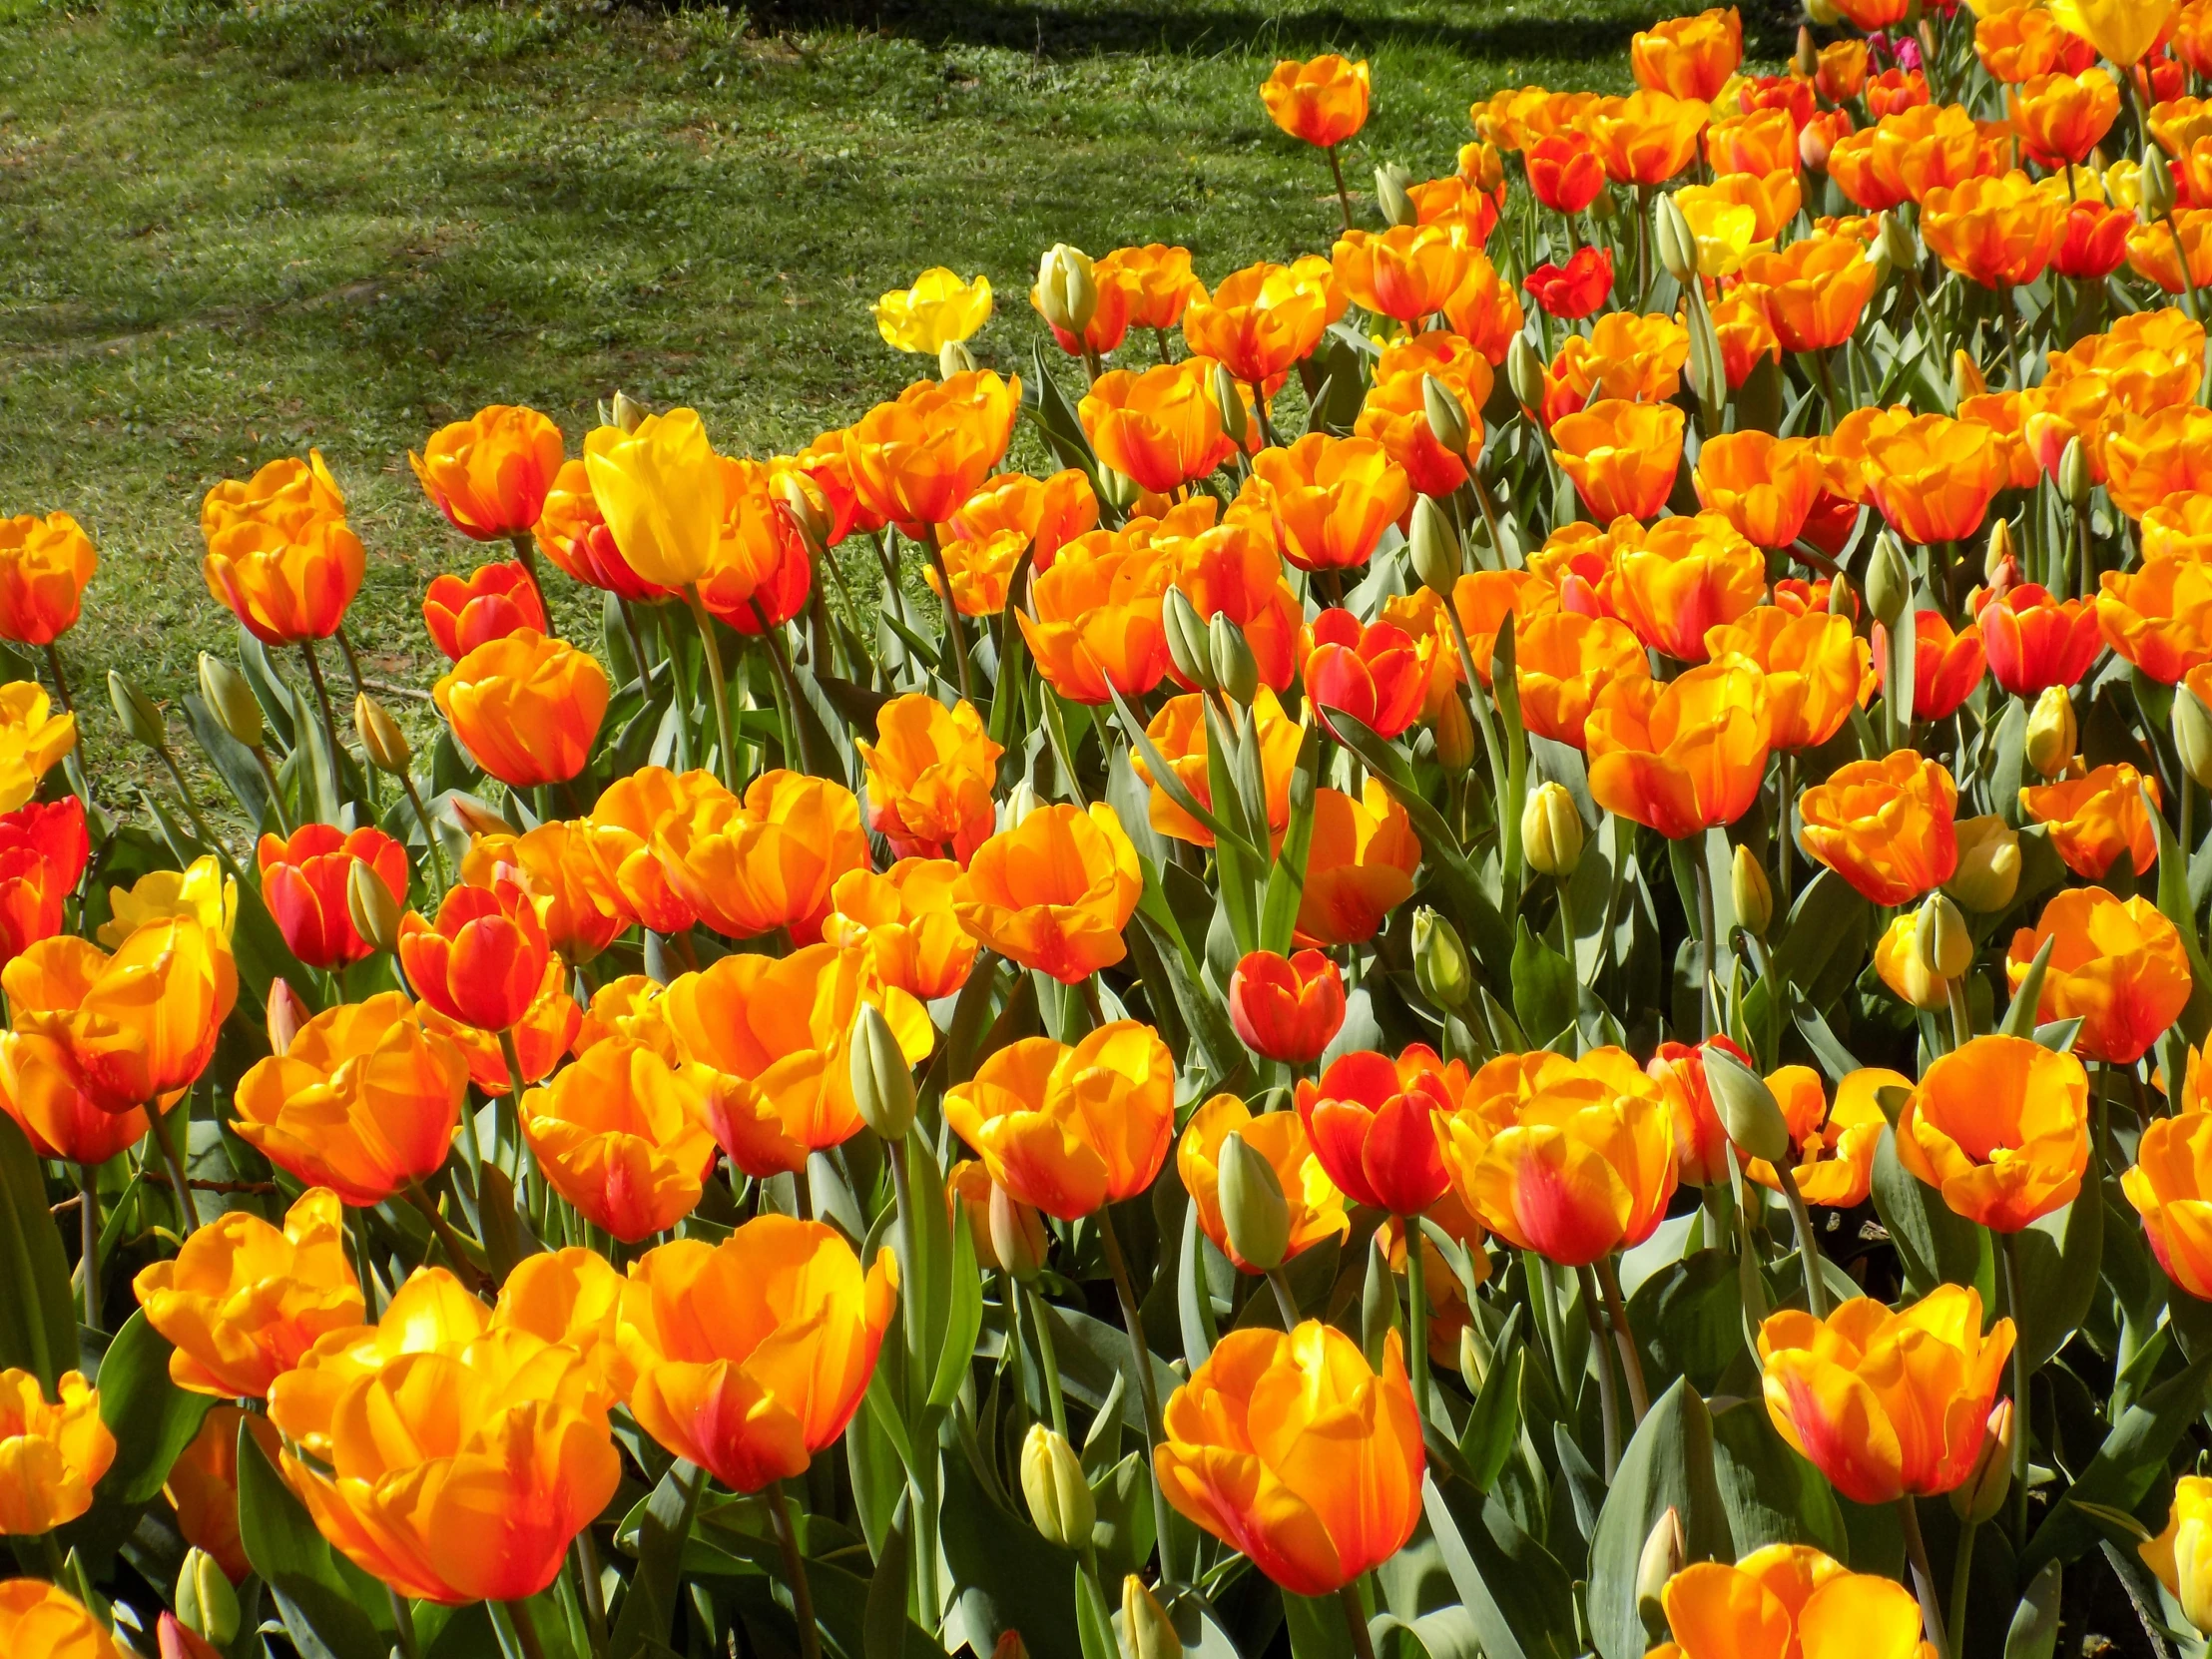 a large field filled with lots of orange flowers